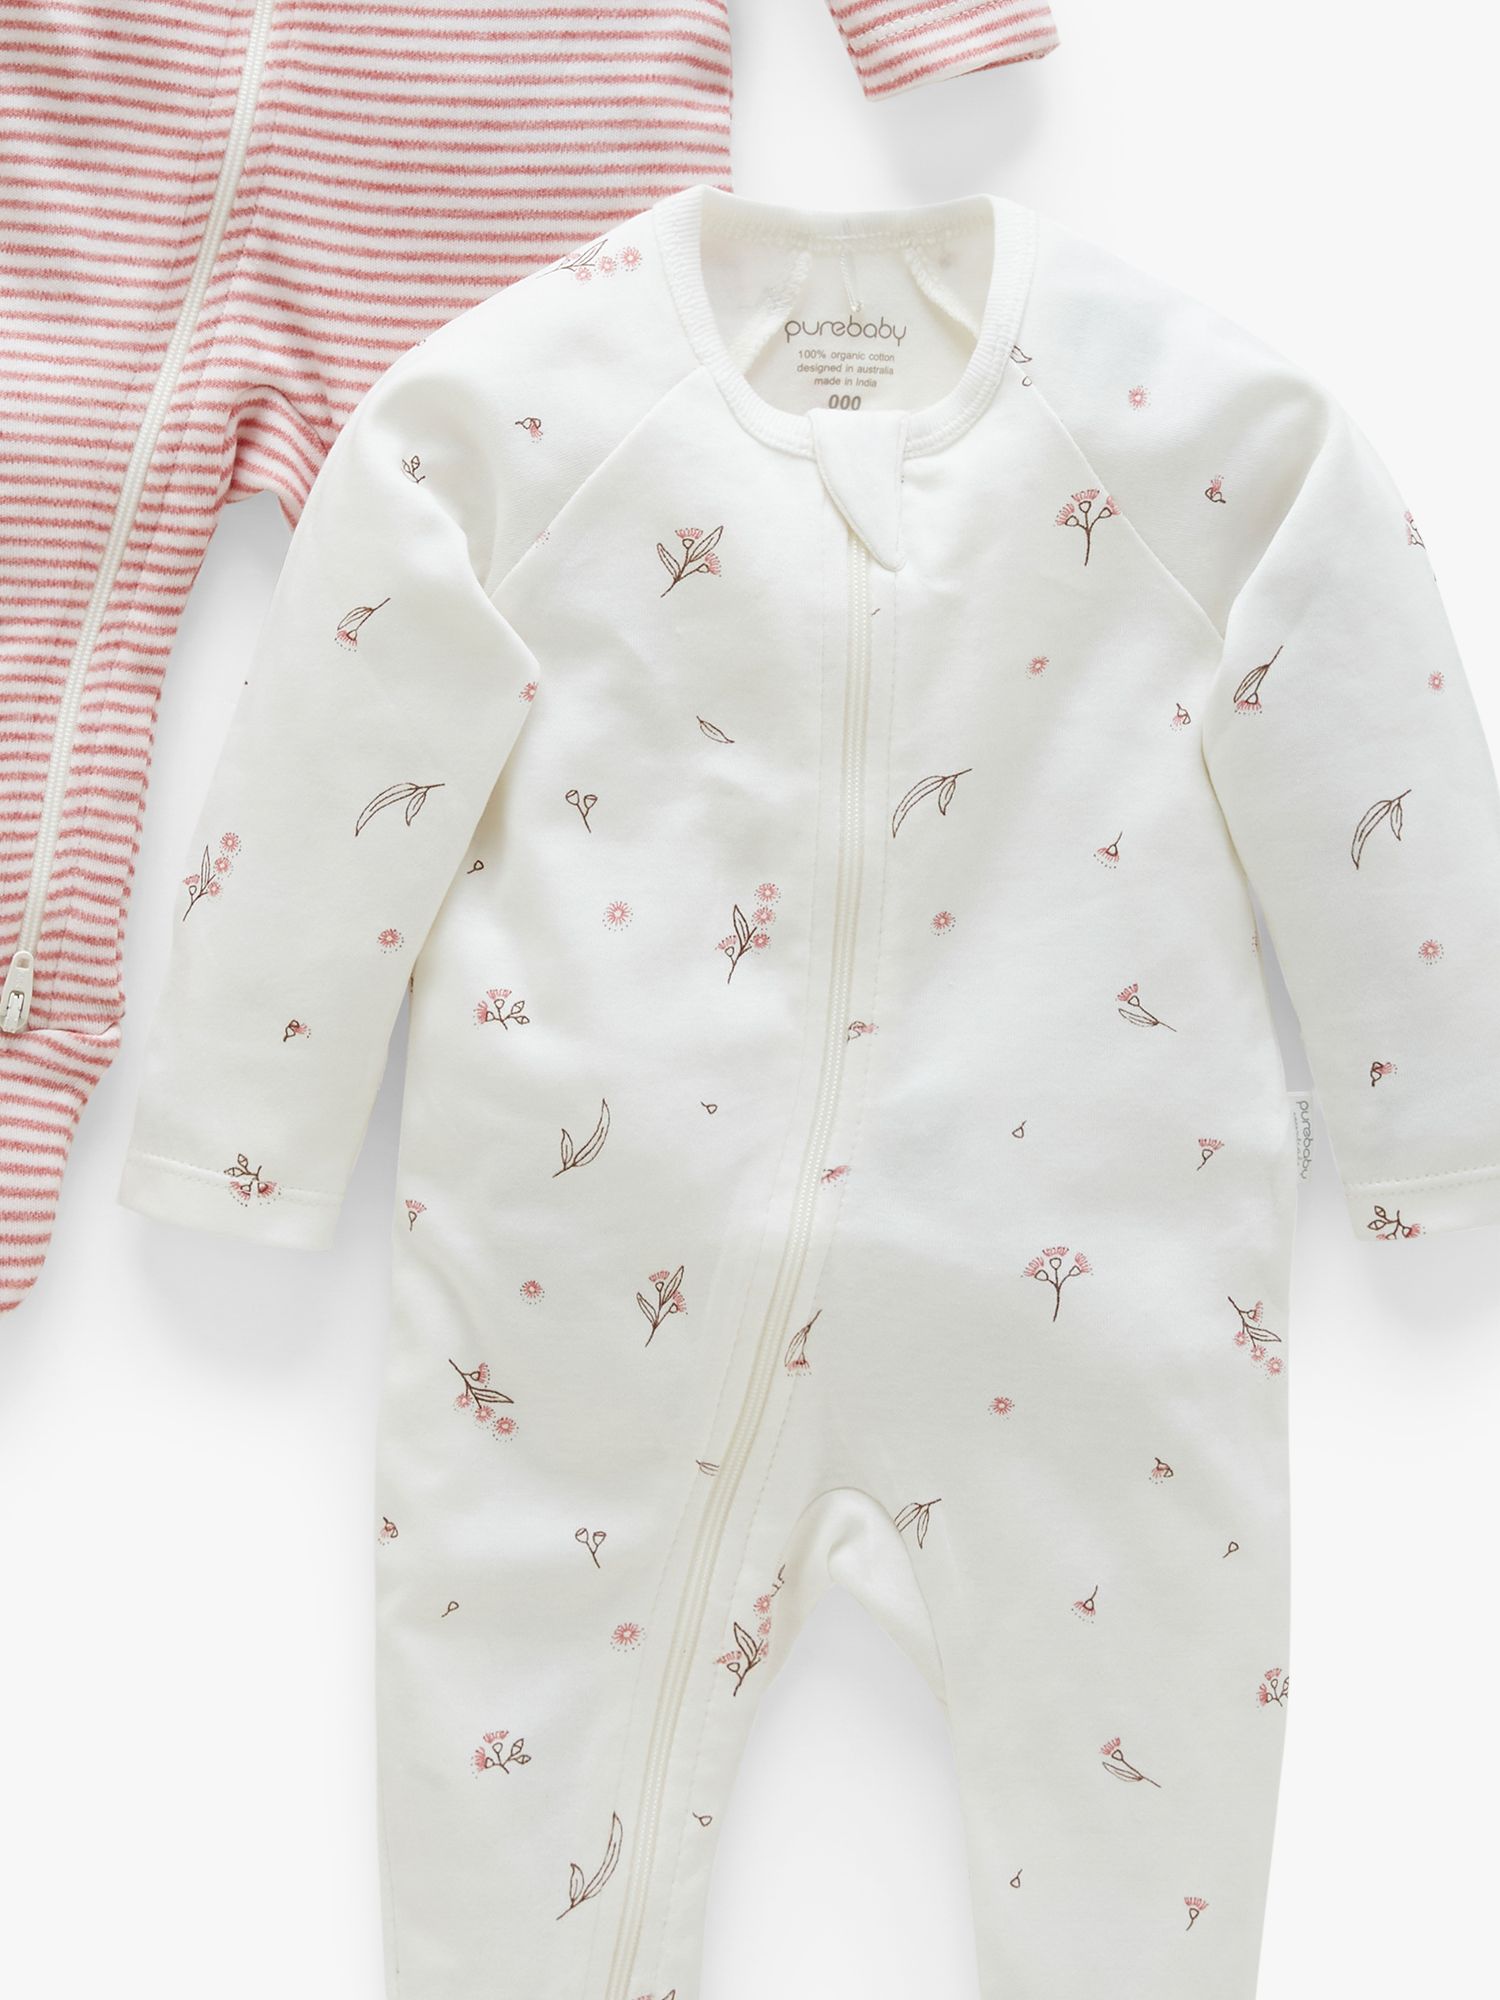 Purebaby Baby Organic Cotton Floral Stripe Sleepsuit, Pack of 2, Blossom, 3-6 months